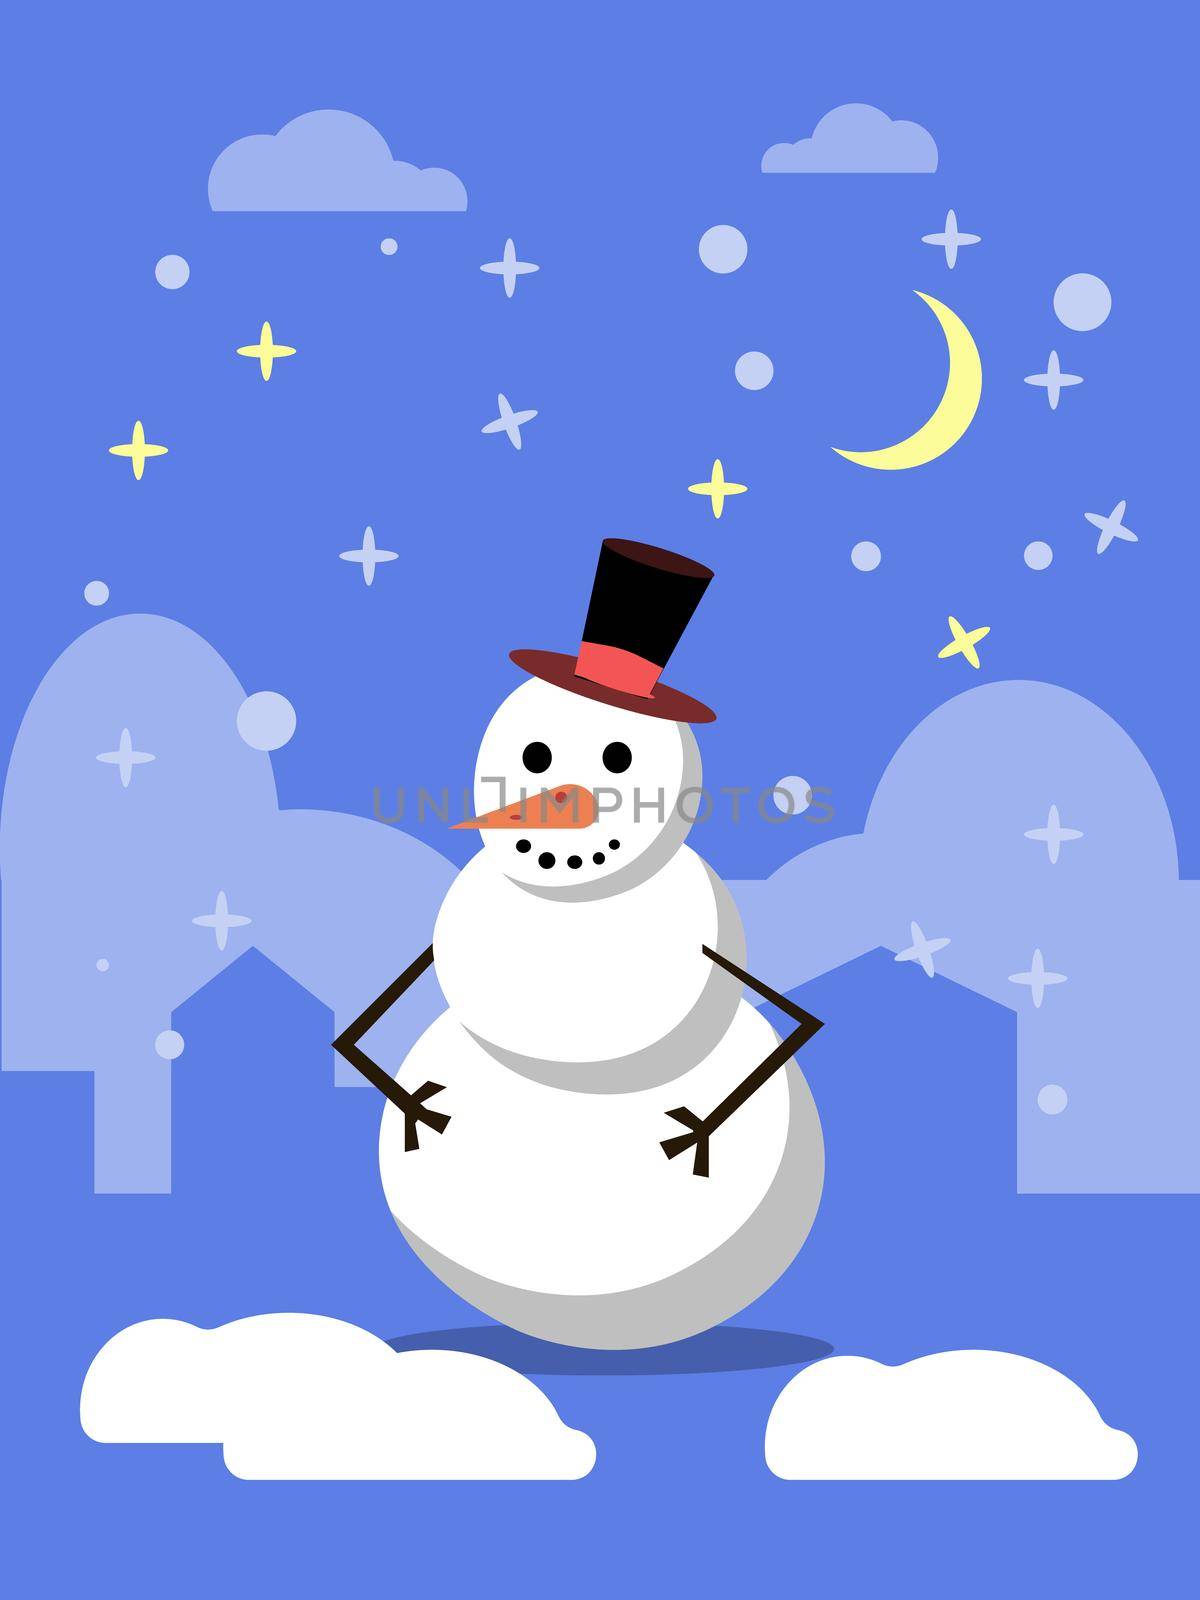 Winter landscape with a snowman with a hat in flat design in